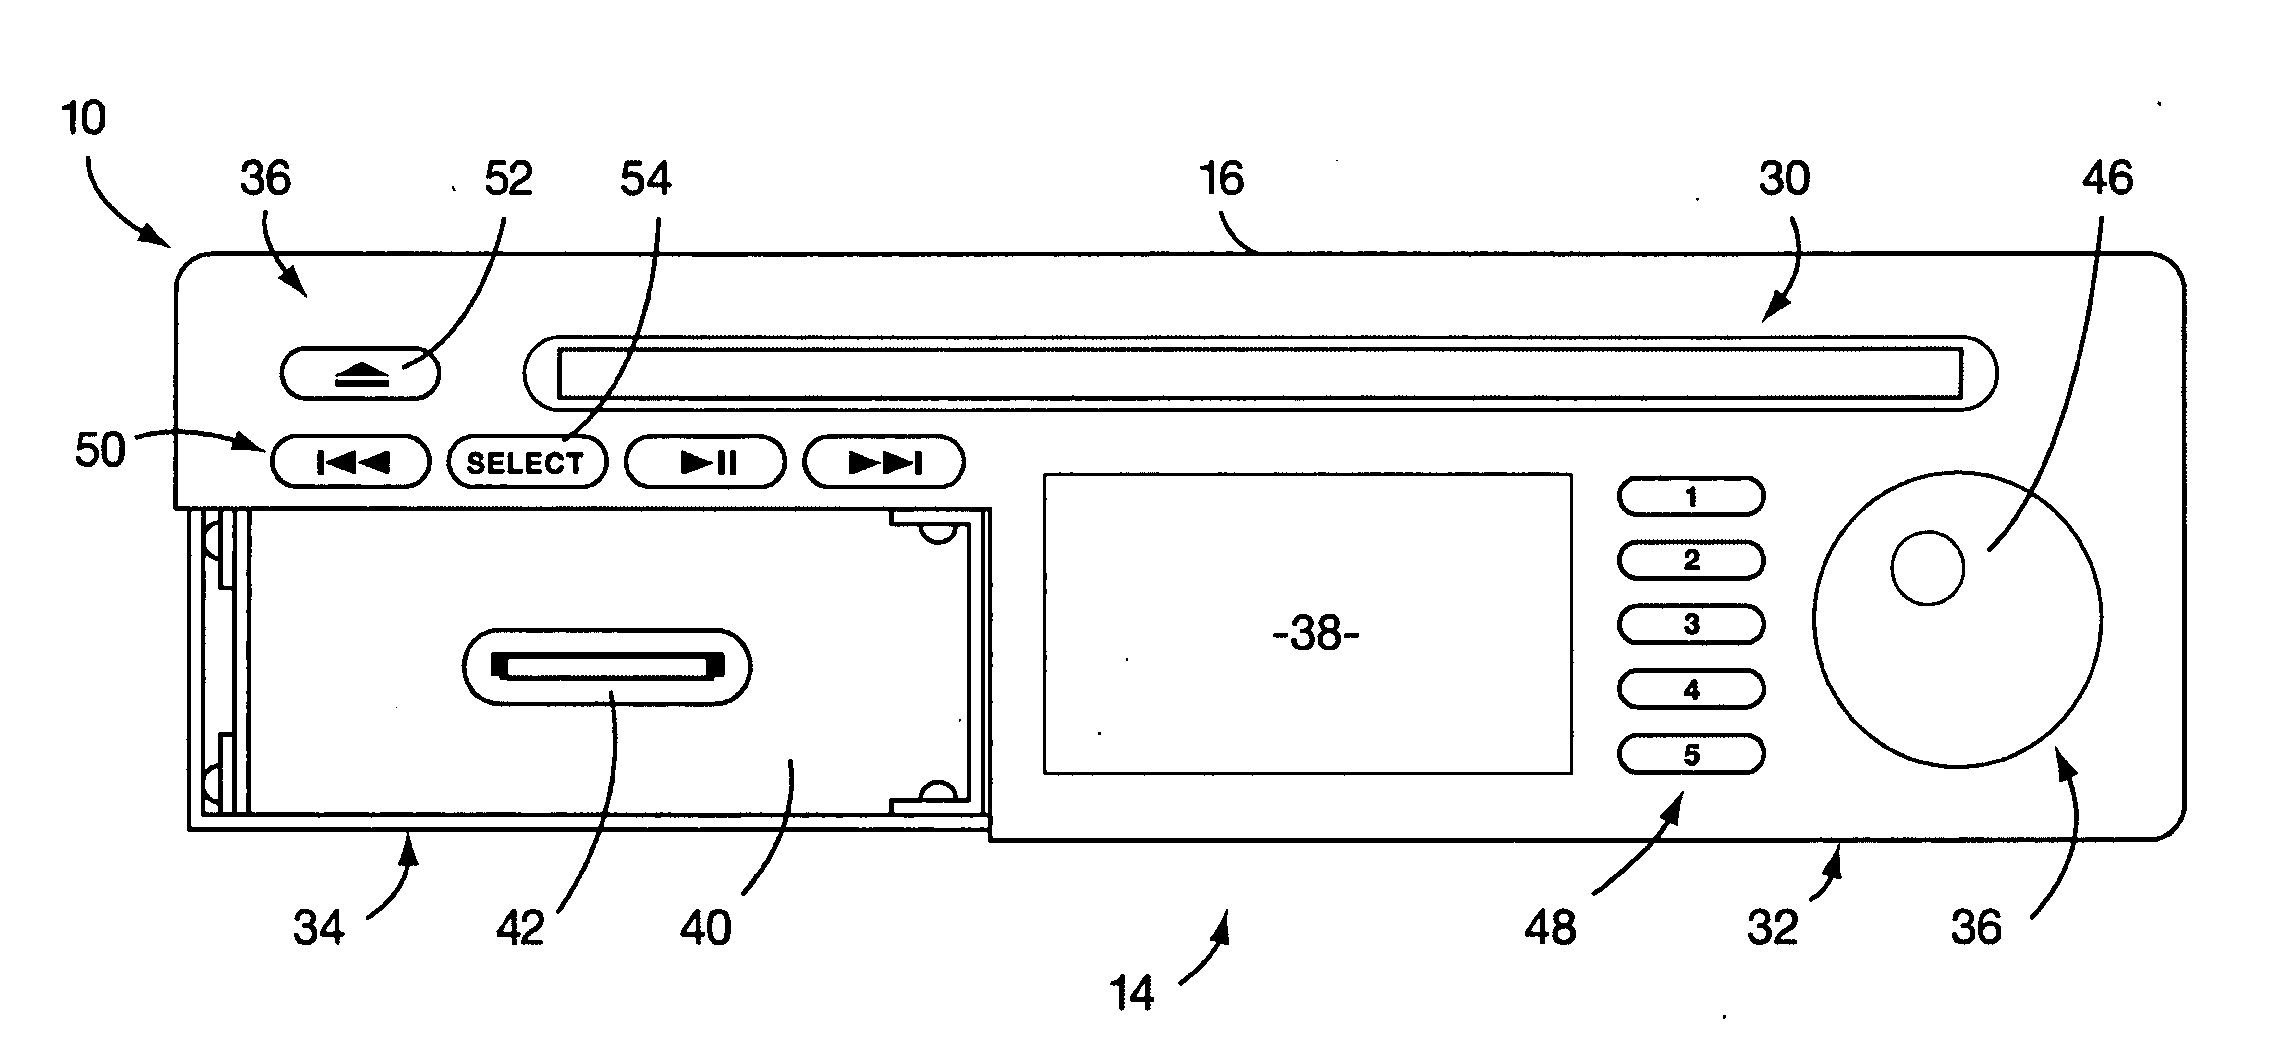 System for listening to playback of music files by a portable audio device while in a vehicle